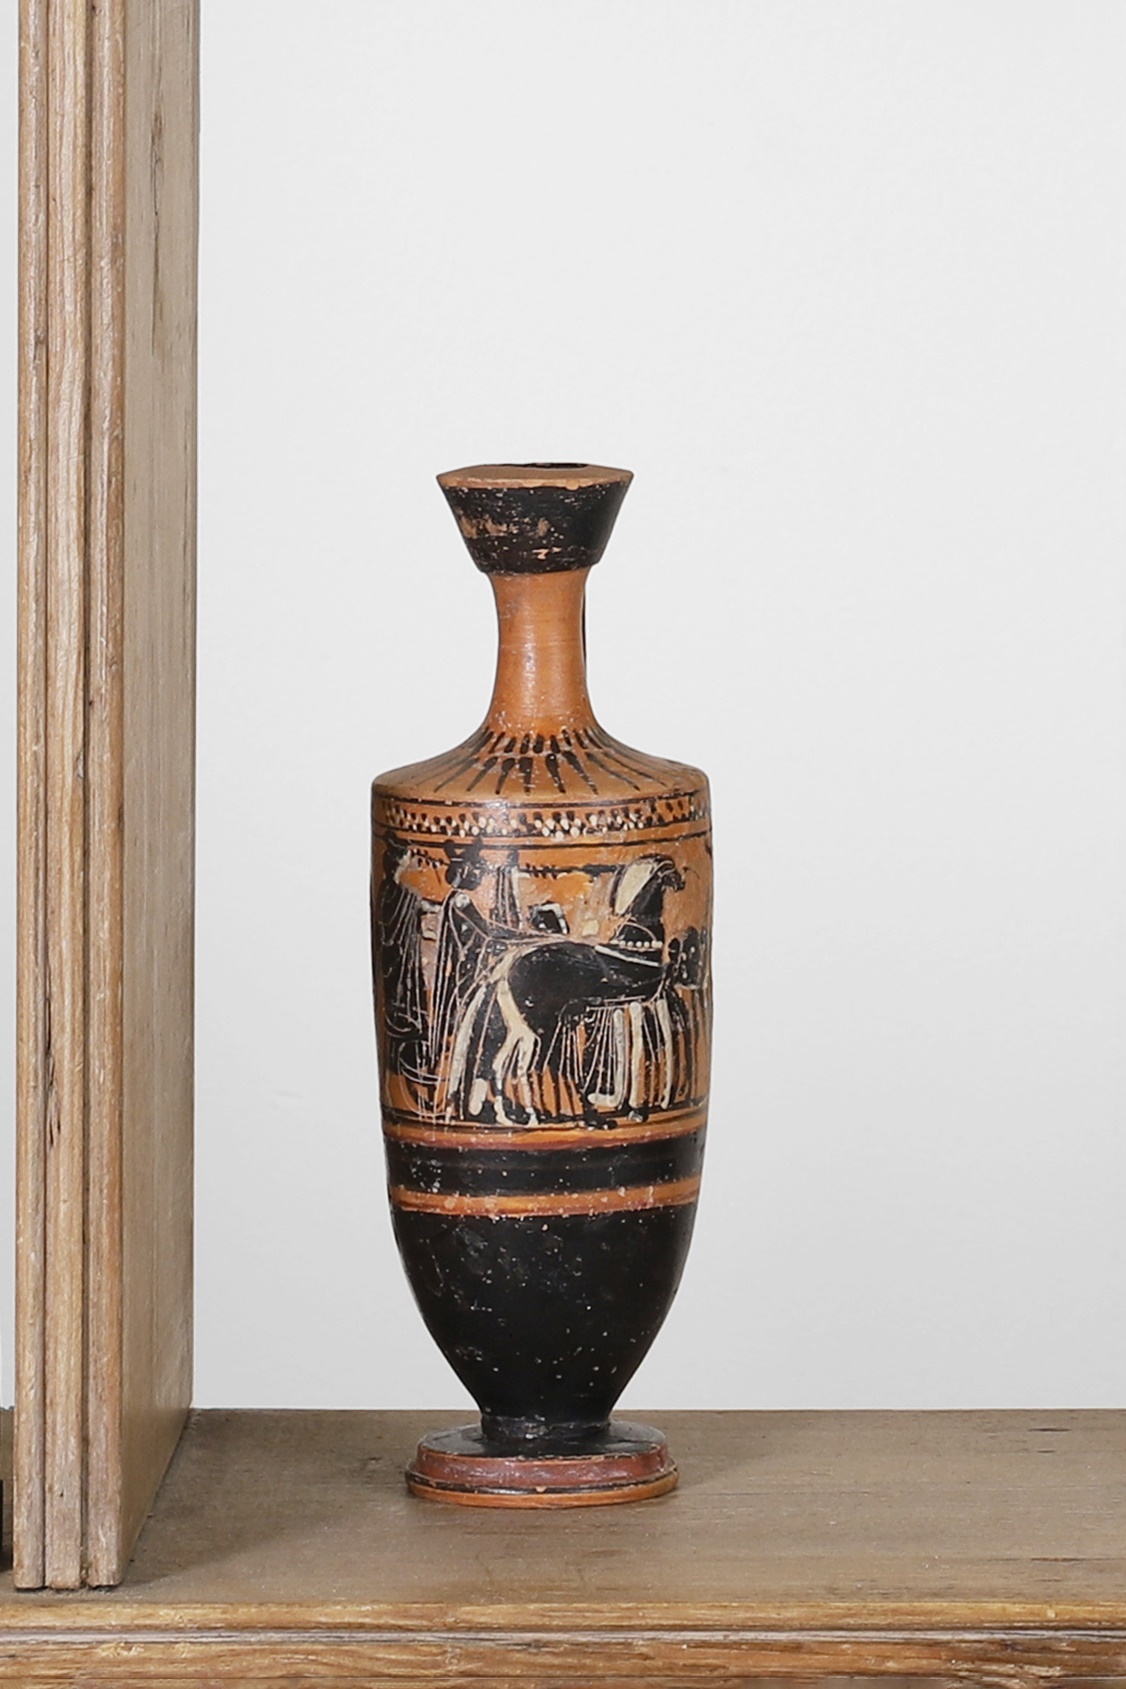 An Attic black-figured lekythos in the manner of the Haimon painter, early 5th century BC, Greek, decorated with figures in a chariot and horses, 6.5cm wide 20cm high